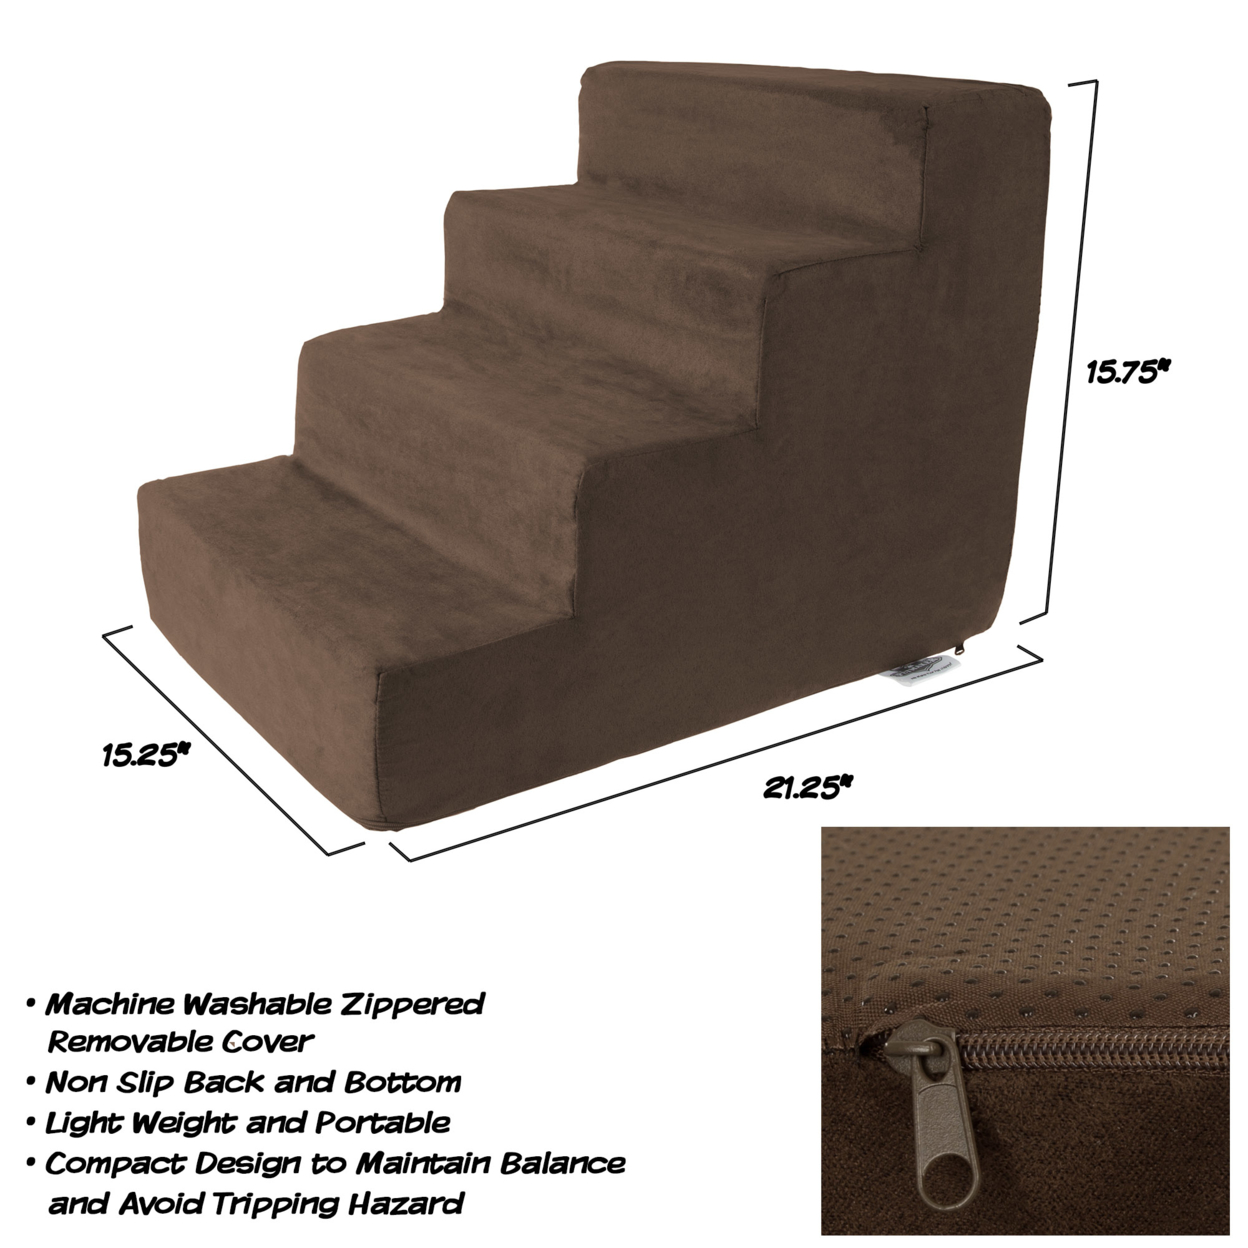 4 Steps High Density Foam Pet Stairs Removable Washable Zipper Cover 15 Inches High Small Dogs Cats Brown